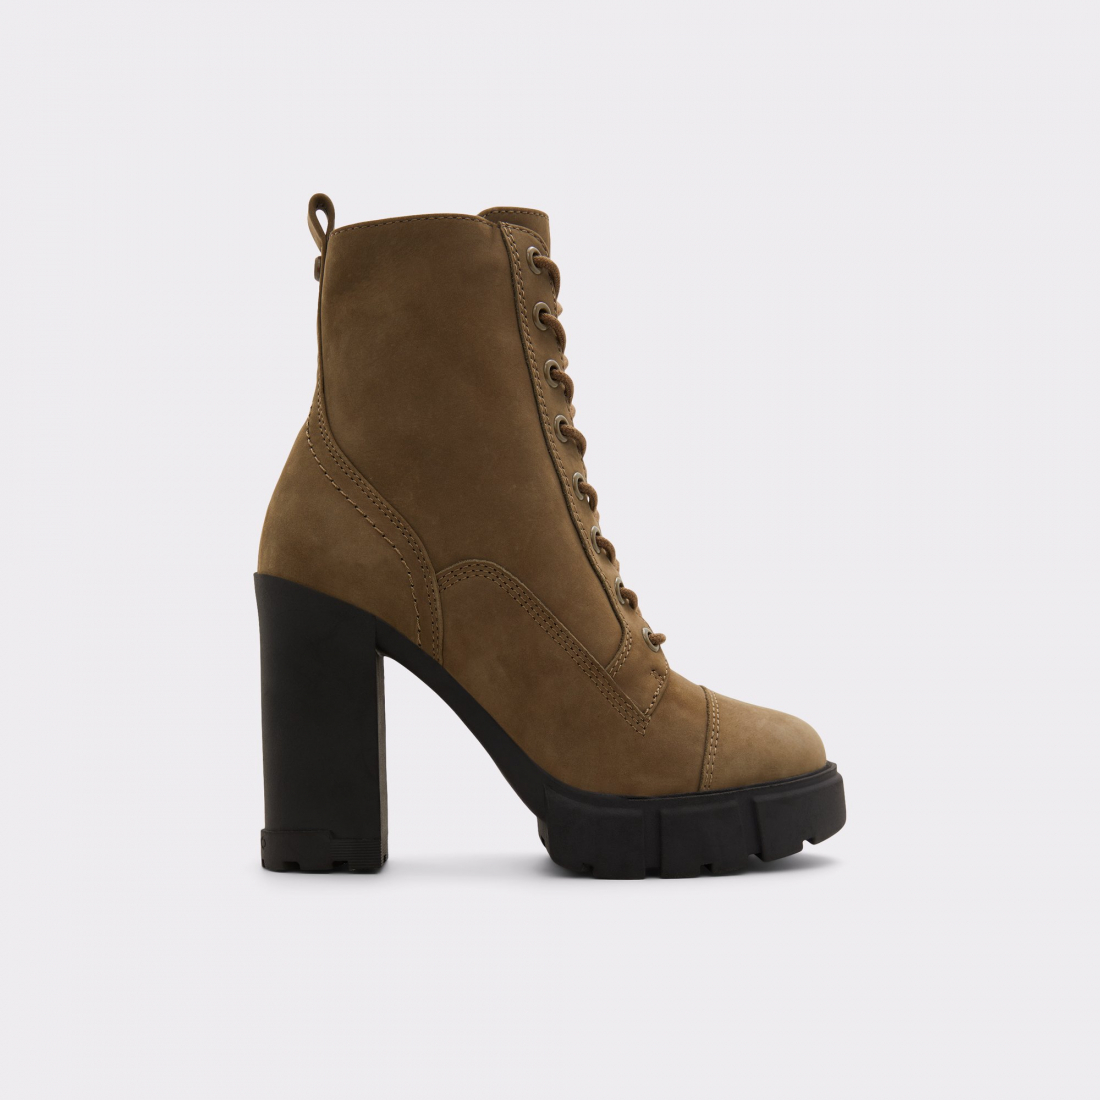 Women's 'Rebel2.0' Ankle Boots